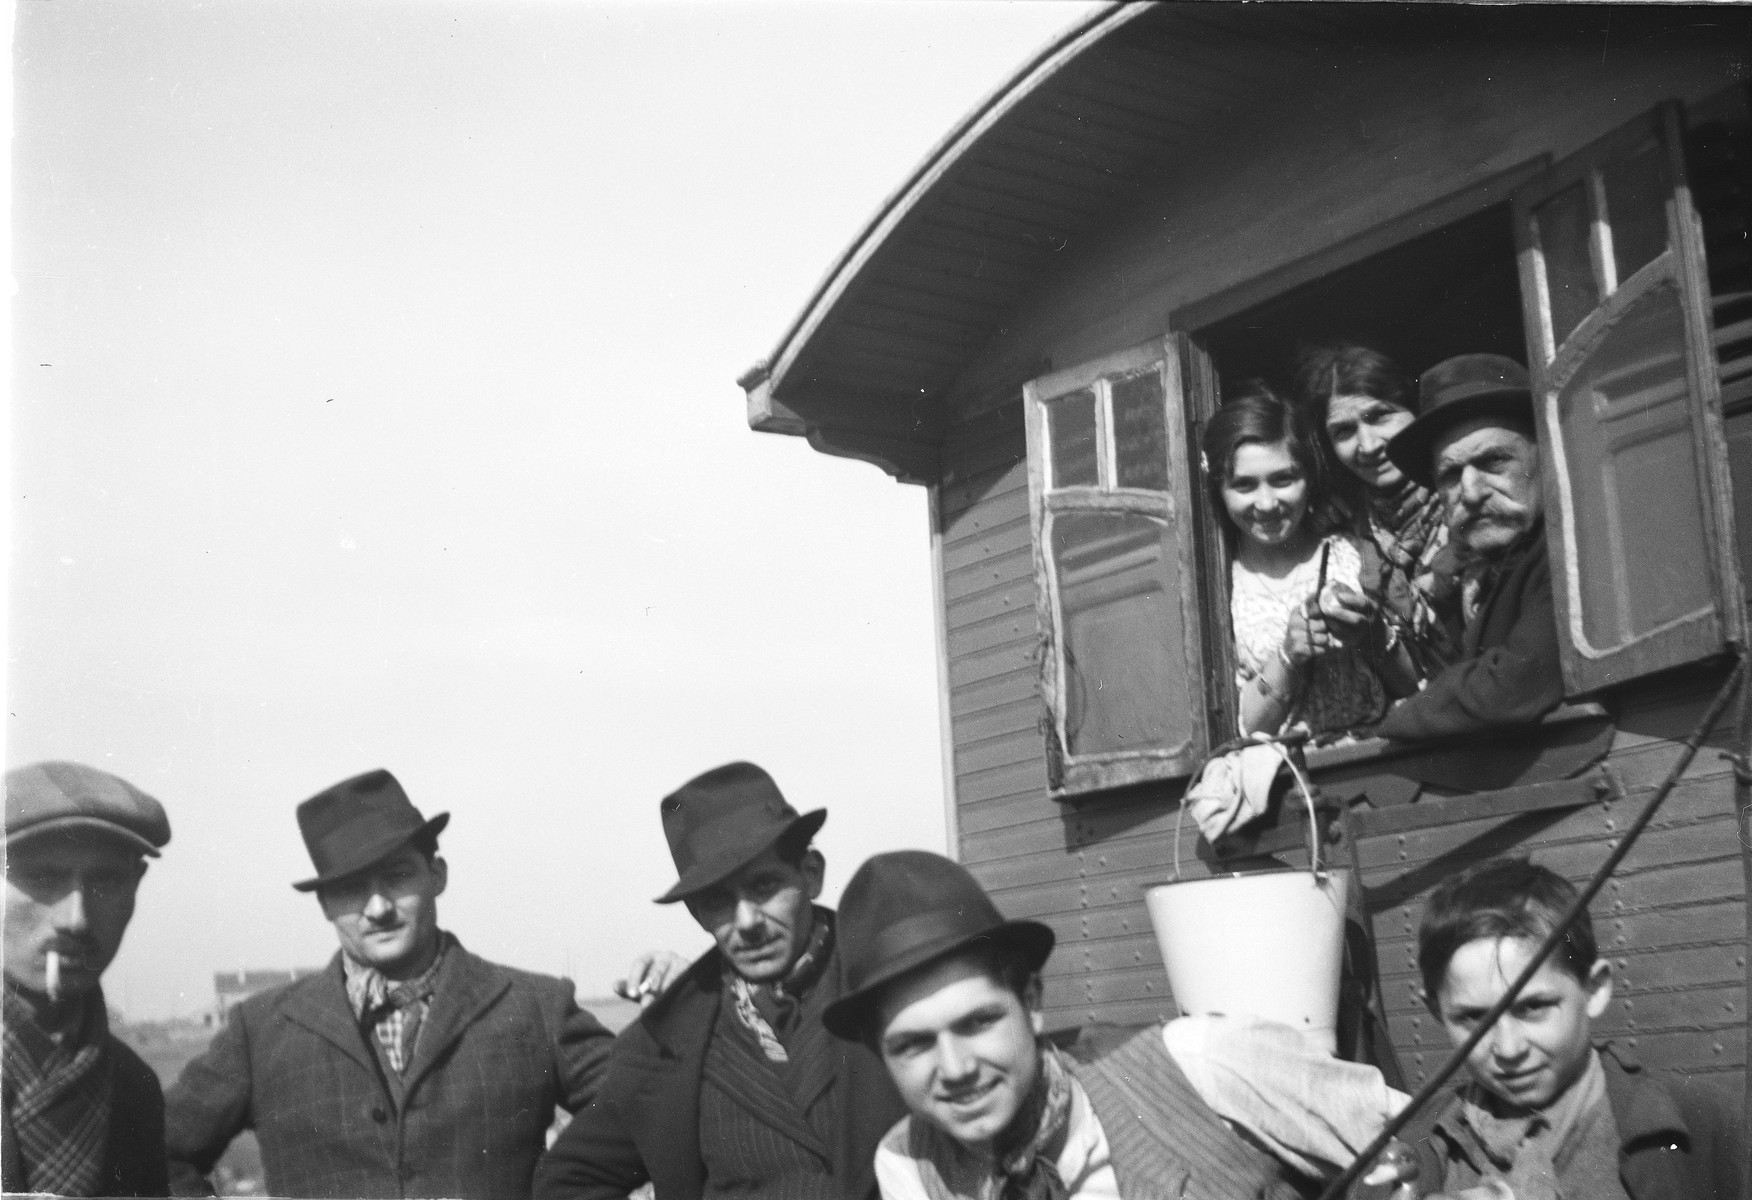 A Romani family poses by their caravan, some standing outside and others looking out from the window. 

Pictured on the bottom, second from the right is Yayal (last name unknown).